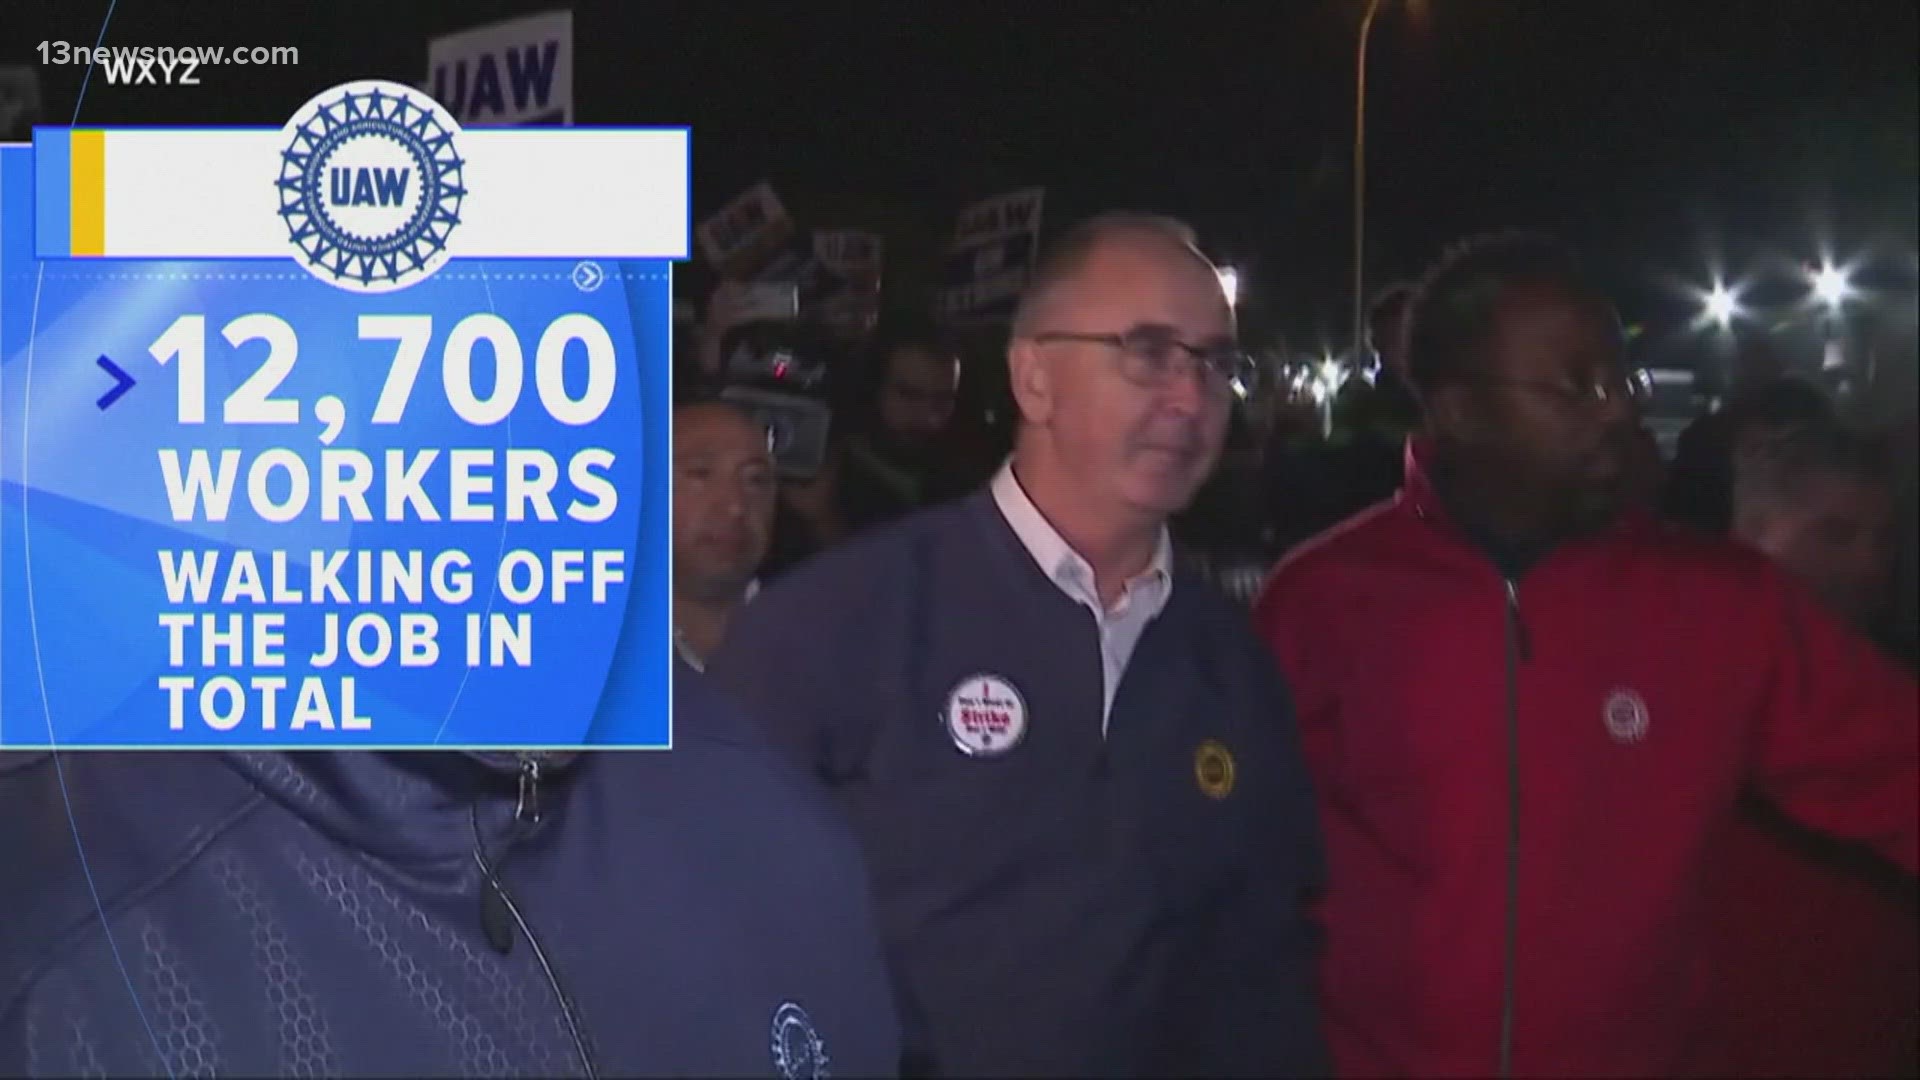 For the first time in their Union's history, United Auto workers are walking off the job. No deal was reached last night despite weeks of negotiations.